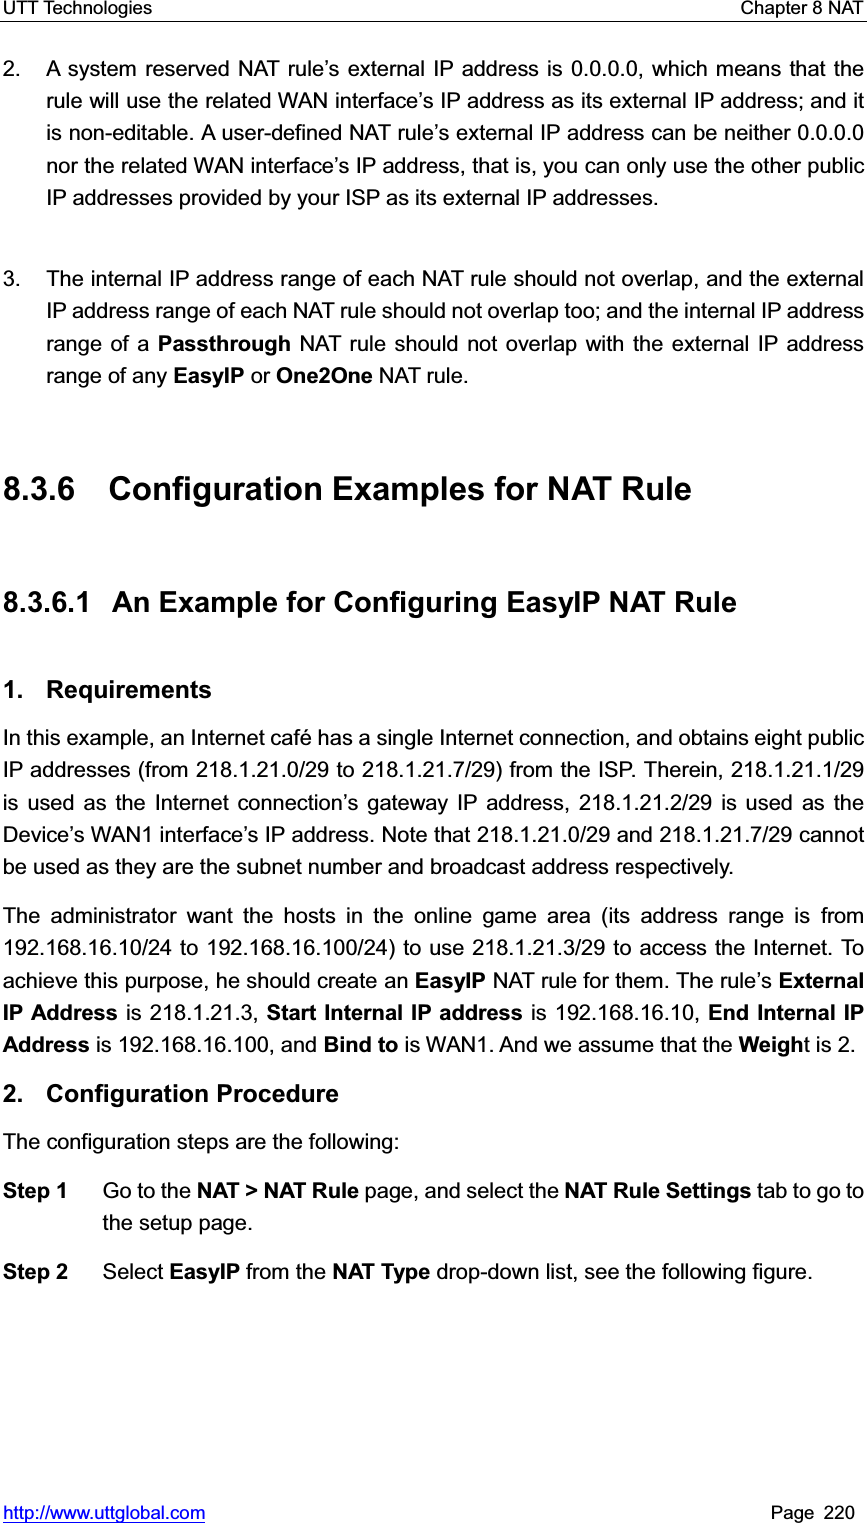 UTT Technologies    Chapter 8 NAT   http://www.uttglobal.com Page 220 2.  A system reserved NAT rule¶s external IP address is 0.0.0.0, which means that the rule will use the related WAN interface¶s IP address as its external IP address; and it is non-editable. A user-defined NAT rule¶s external IP address can be neither 0.0.0.0 nor the related WAN interface¶s IP address, that is, you can only use the other public IP addresses provided by your ISP as its external IP addresses.   3.  The internal IP address range of each NAT rule should not overlap, and the external IP address range of each NAT rule should not overlap too; and the internal IP address range of a Passthrough NAT rule should not overlap with the external IP address range of any EasyIP or One2One NAT rule.     8.3.6  Configuration Examples for NAT Rule 8.3.6.1  An Example for Configuring EasyIP NAT Rule 1. Requirements In this example, an Internet café has a single Internet connection, and obtains eight public IP addresses (from 218.1.21.0/29 to 218.1.21.7/29) from the ISP. Therein, 218.1.21.1/29 is used as the Internet connection¶s gateway IP address, 218.1.21.2/29 is used as the Device¶s WAN1 interfacH¶s IP address. Note that 218.1.21.0/29 and 218.1.21.7/29 cannot be used as they are the subnet number and broadcast address respectively. The administrator want the hosts in the online game area (its address range is from 192.168.16.10/24 to 192.168.16.100/24) to use 218.1.21.3/29 to access the Internet. To achieve this purpose, he should create an EasyIP NAT rule for them. The rule¶sExternal IP Address is 218.1.21.3, Start Internal IP address is 192.168.16.10, End Internal IP Address is 192.168.16.100, and Bind to is WAN1. And we assume that the Weight is 2.   2. Configuration Procedure The configuration steps are the following:   Step 1  Go to the NAT &gt; NAT Rule page, and select the NAT Rule Settings tab to go to the setup page. Step 2  Select EasyIP from the NAT Type drop-down list, see the following figure. 